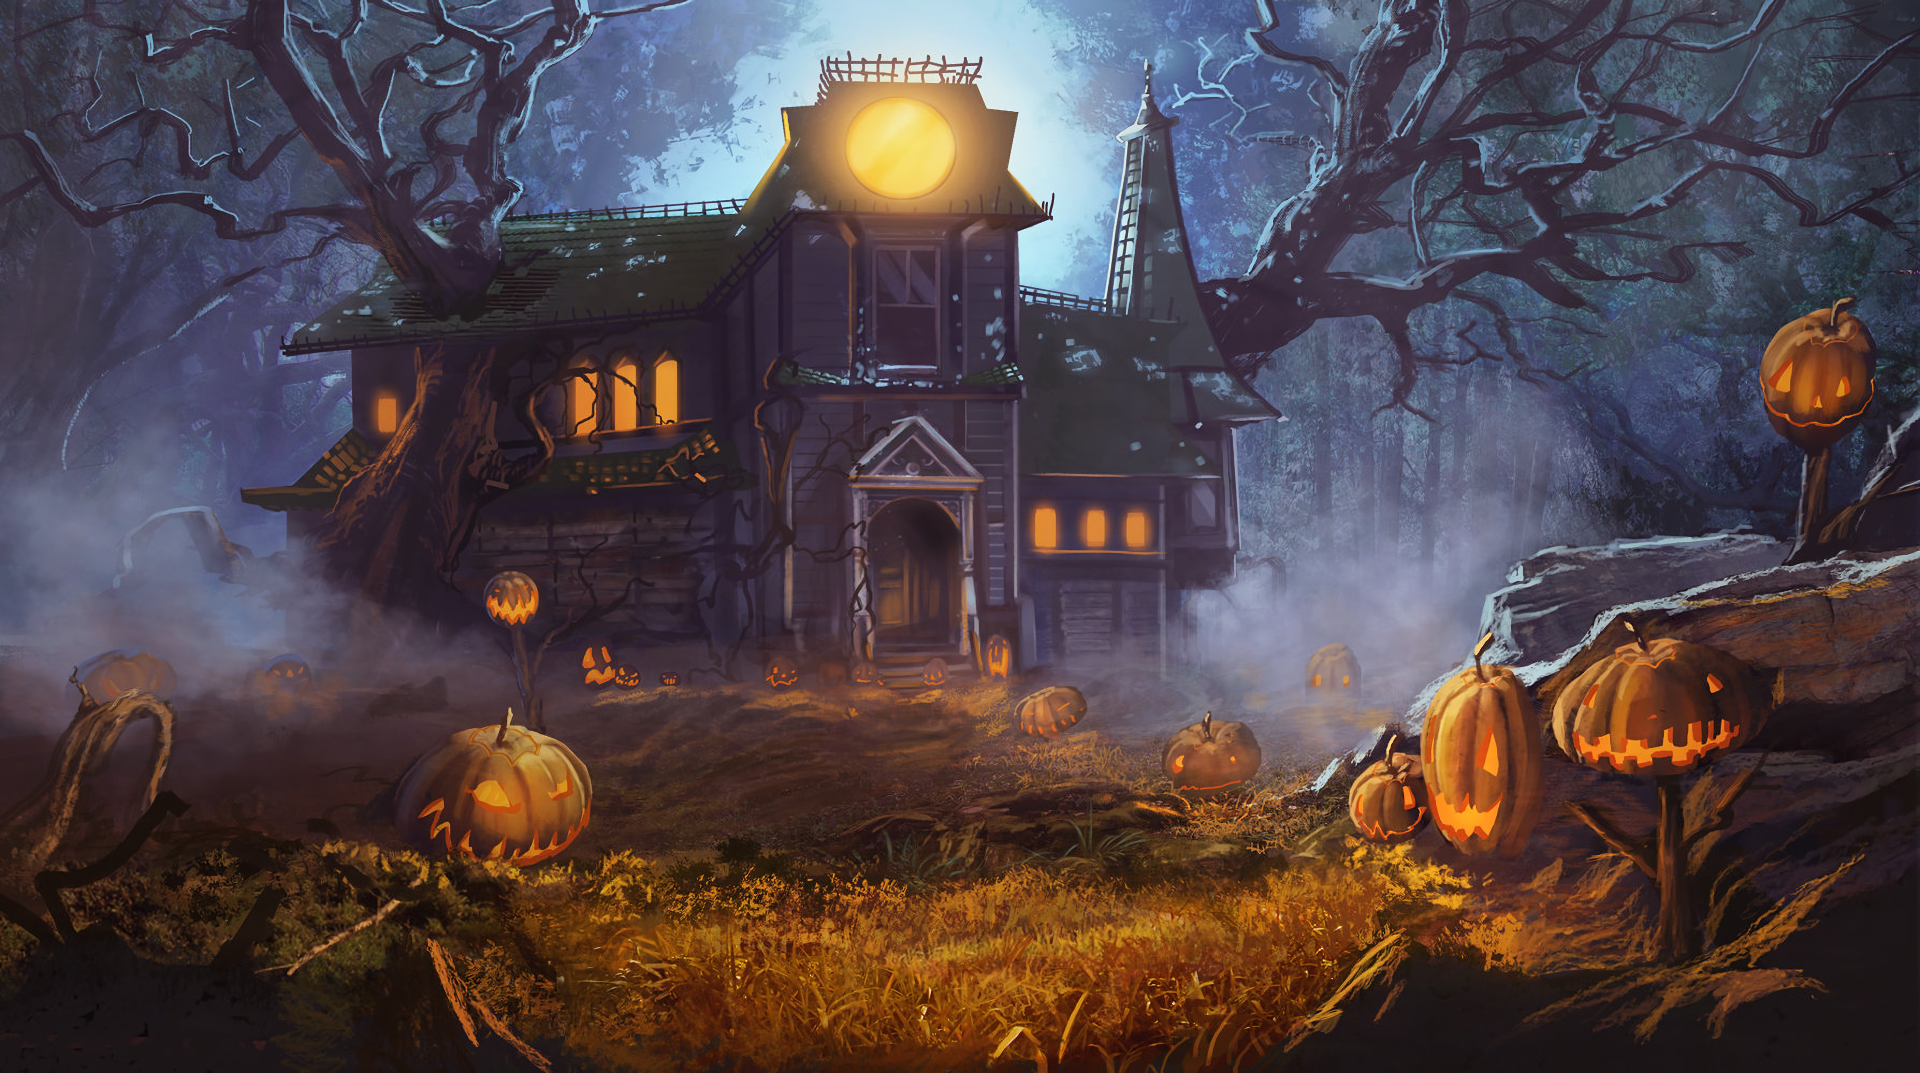 Haunted House on Halloween by Thomas Lépine